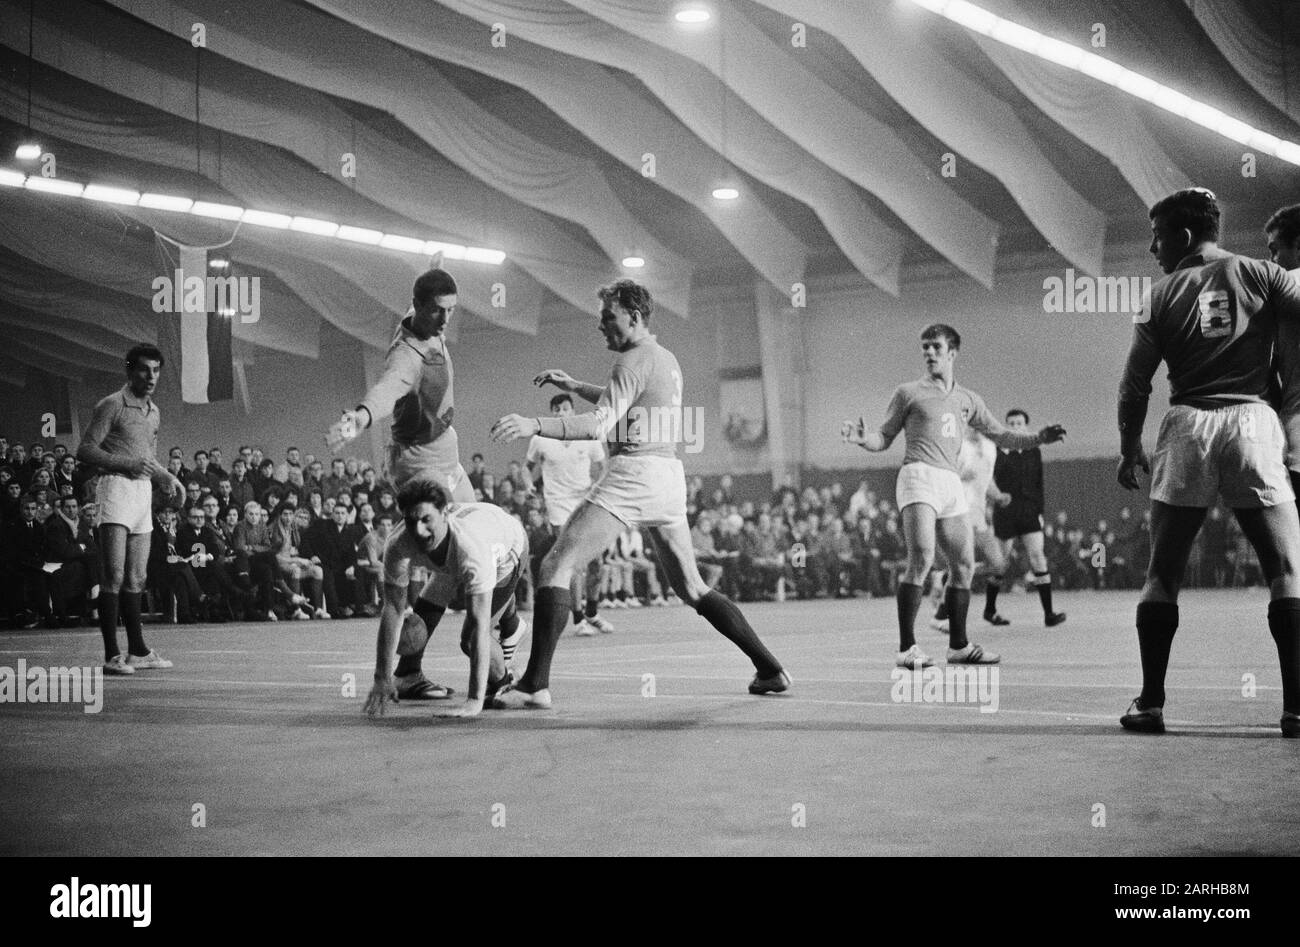 Zaalhandbal Netherlands against France in The Hague, Fran attack by R. Lambert entirely left the Hollander Jaap Bax Date: 7 February 1965 Location: The Hague, France, Netherlands Keywords: Handball Personal name: R. Lambert Stock Photo